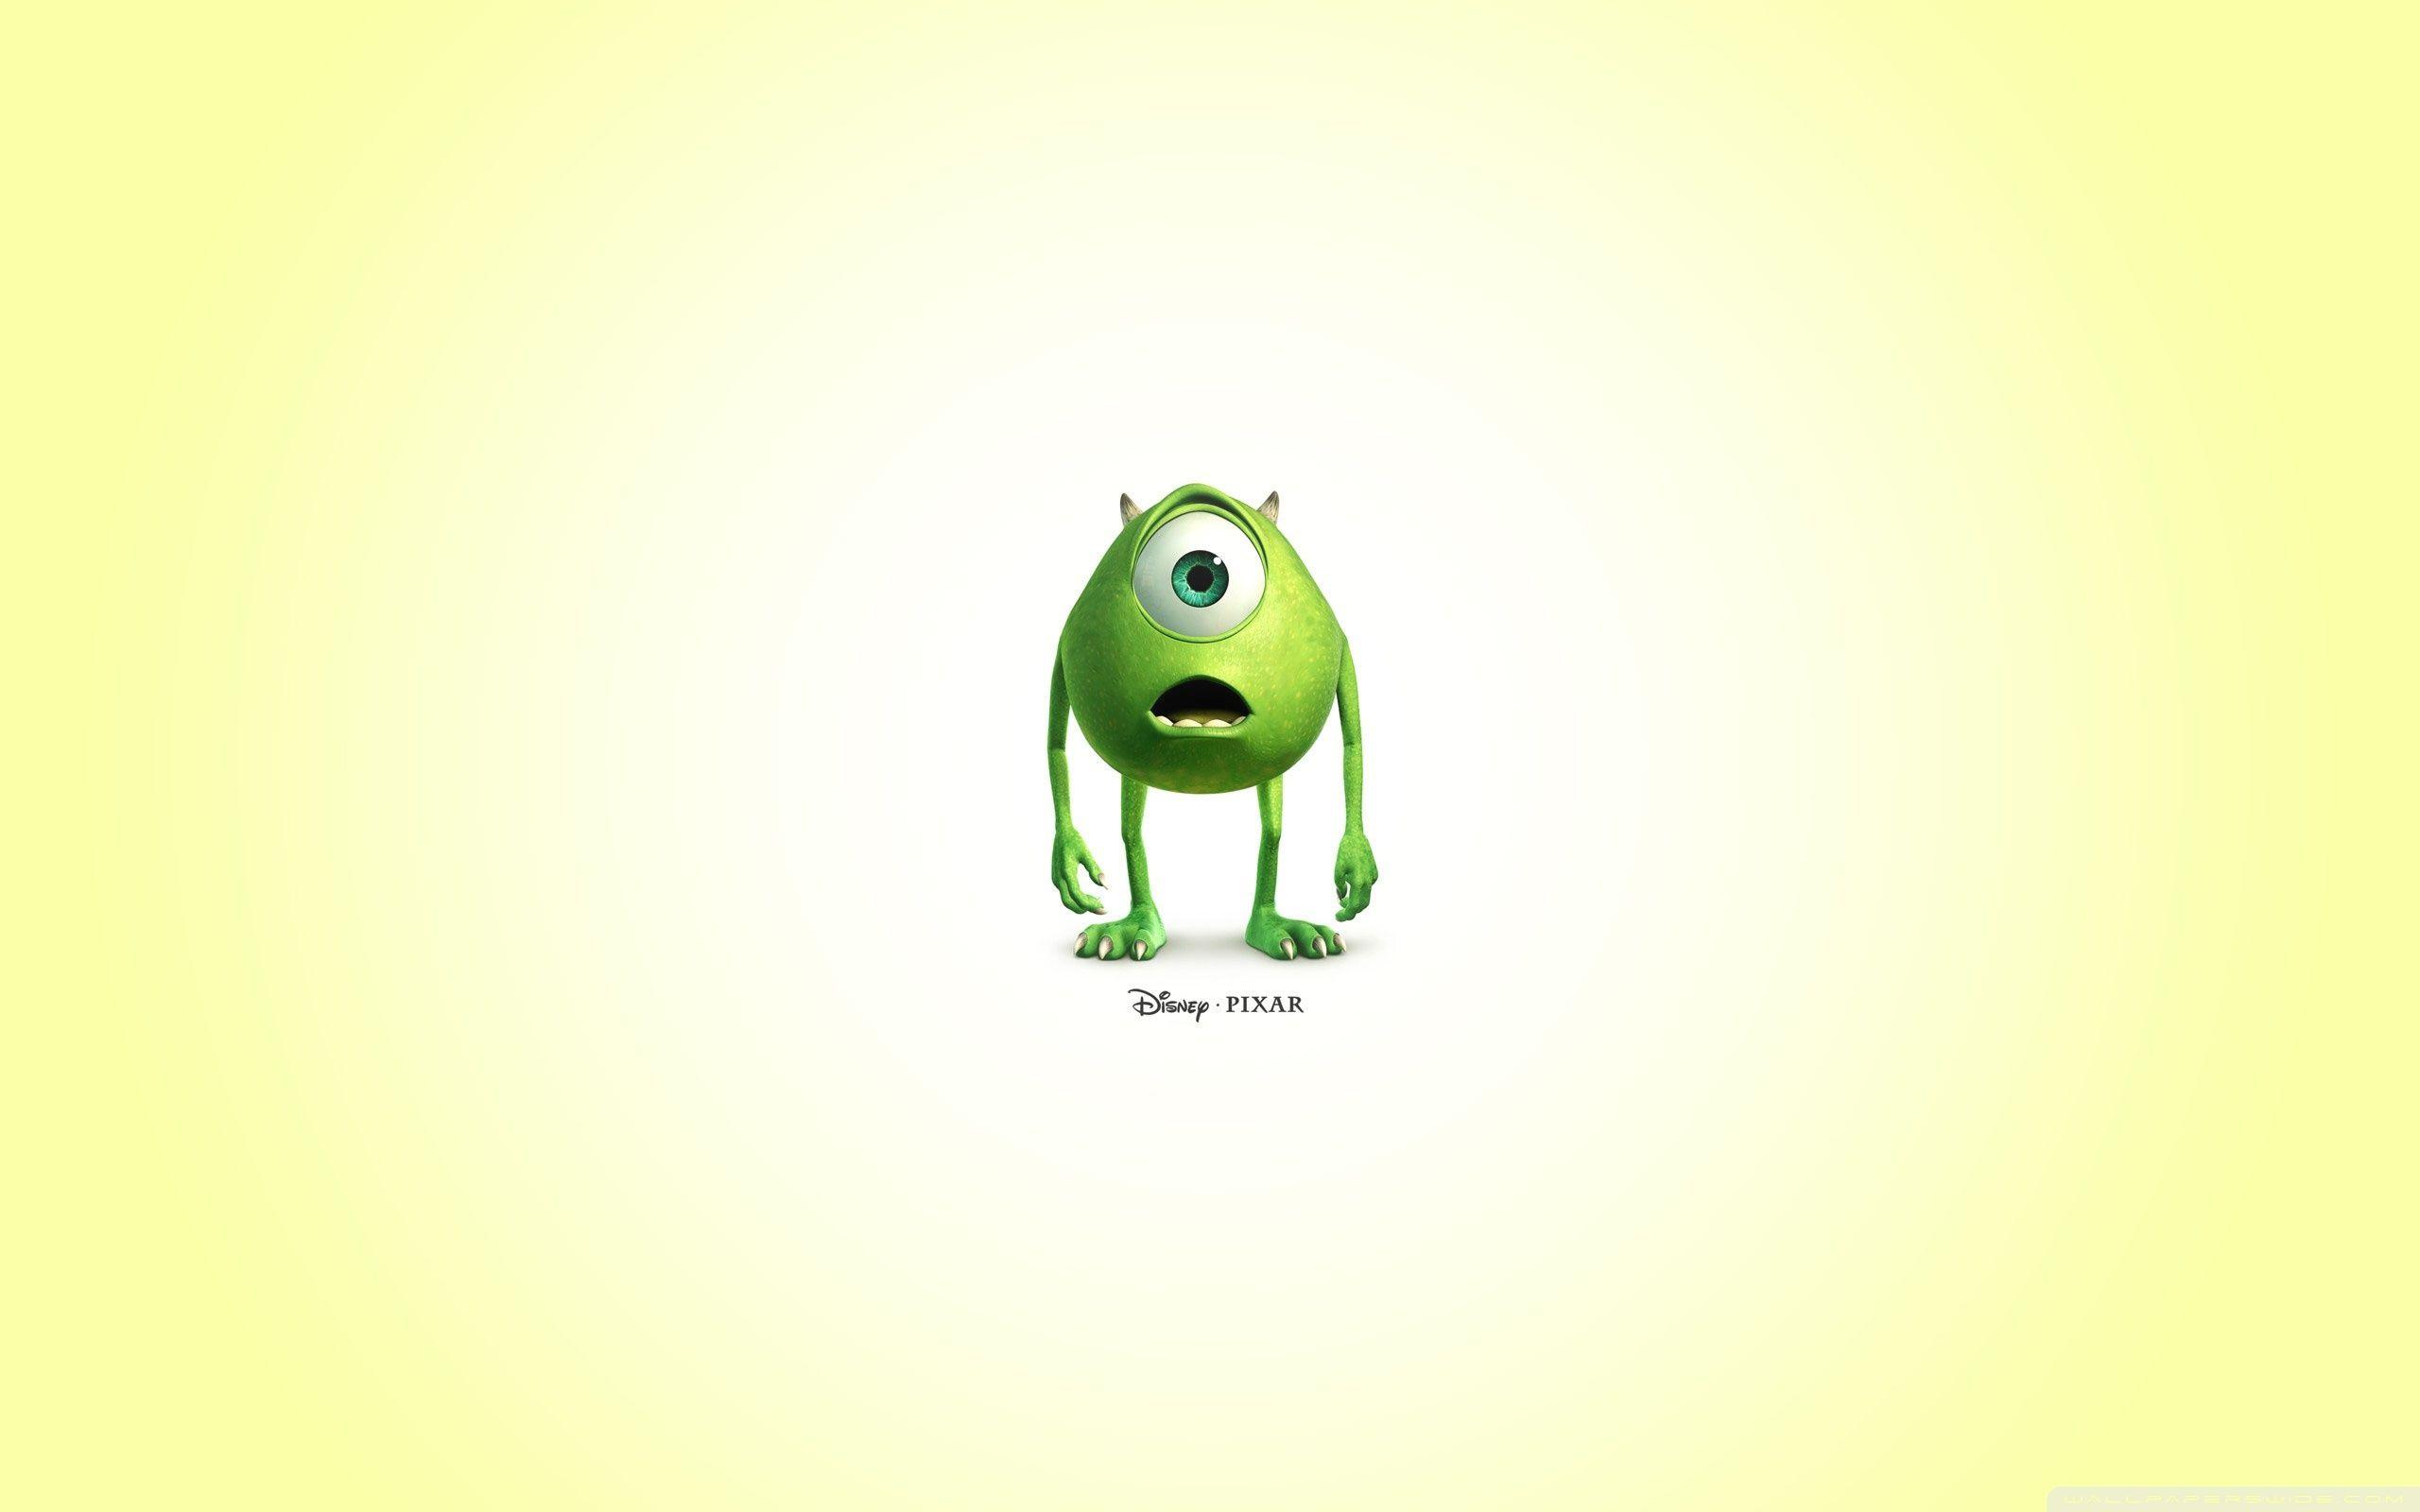 Monsters Inc. 2 Ultra HD Desktop Background Wallpaper for: Multi Display, Dual Monitor, Tablet